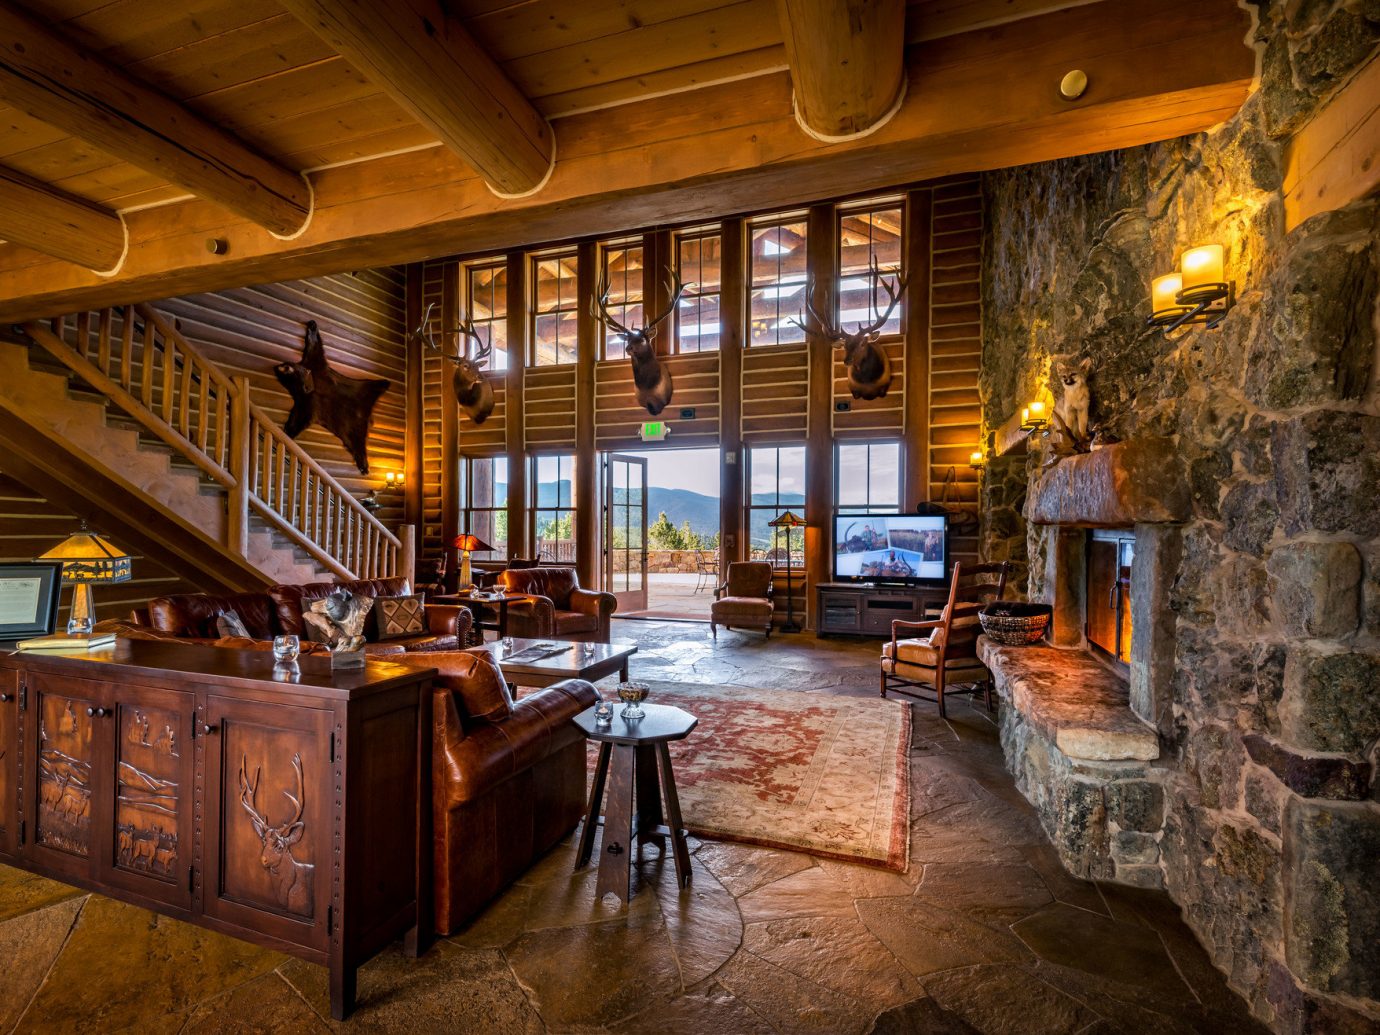 ambient lighting Cabin calm cozy extravagant Fireplace isolation Lodge log cabin Lounge Luxury Mountains Nature Outdoors remote Rustic serene Trip Ideas view warm indoor ceiling room estate building house home interior design wood restaurant Bar tavern furniture stone